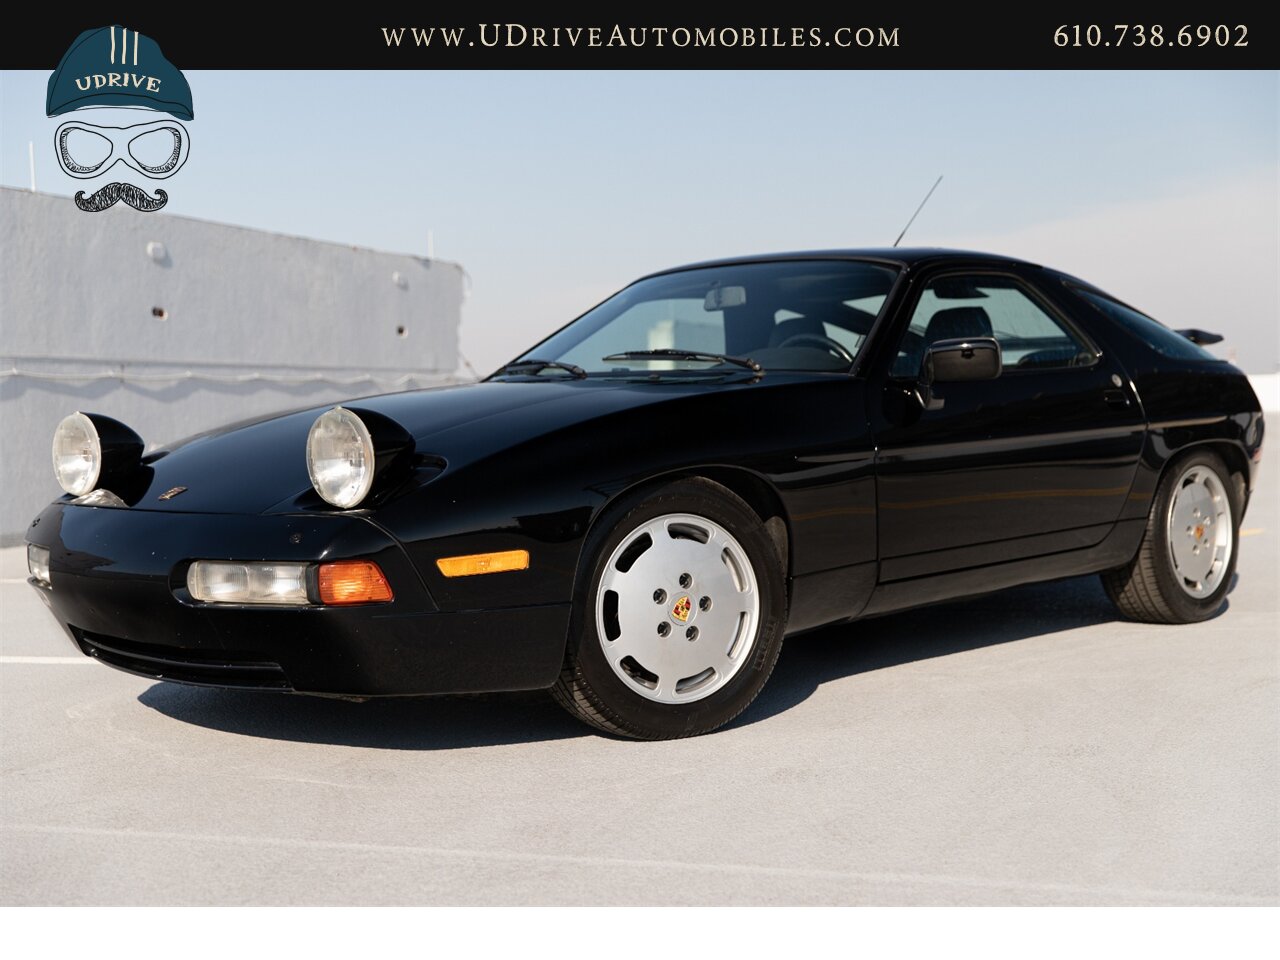 1990 Porsche 928 S4 $58k in Service History Since 2014   - Photo 4 - West Chester, PA 19382